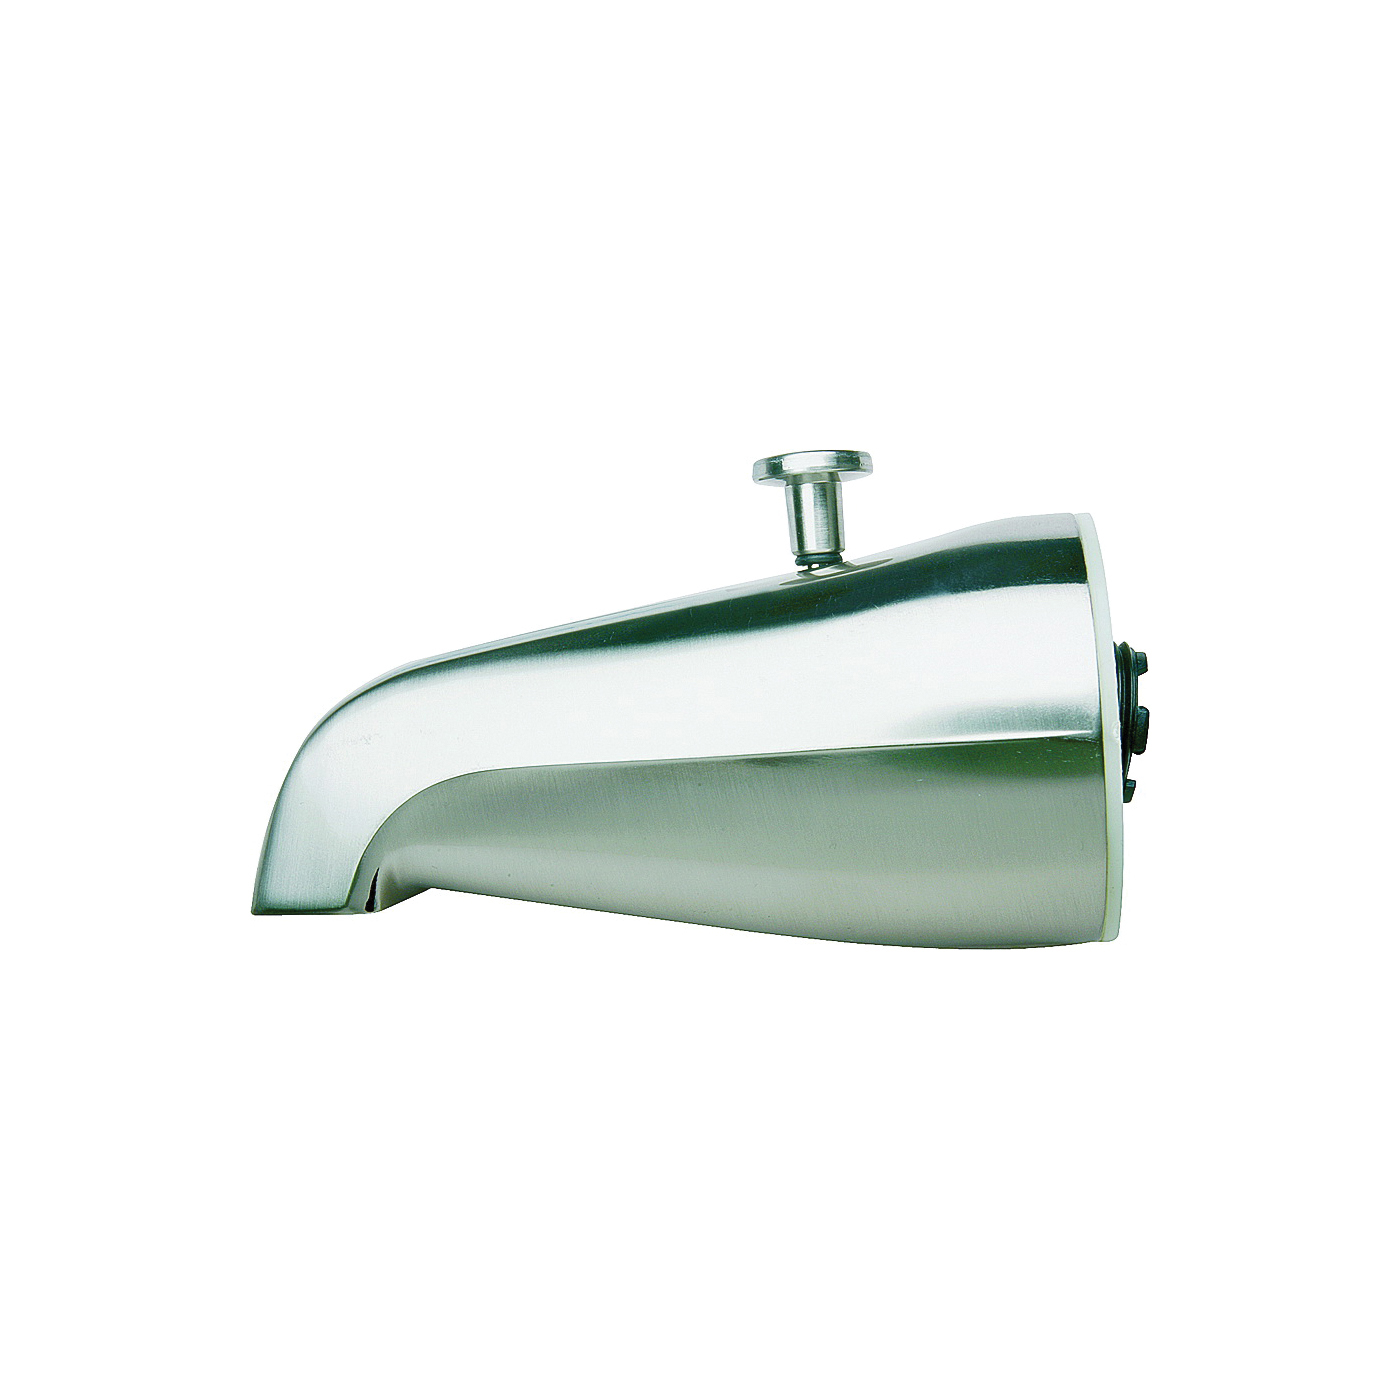 PP825-31 Bathtub Spout, 3/4 in Connection, IPS, Chrome Plated, For: 1/2 in or 3/4 in Pipe